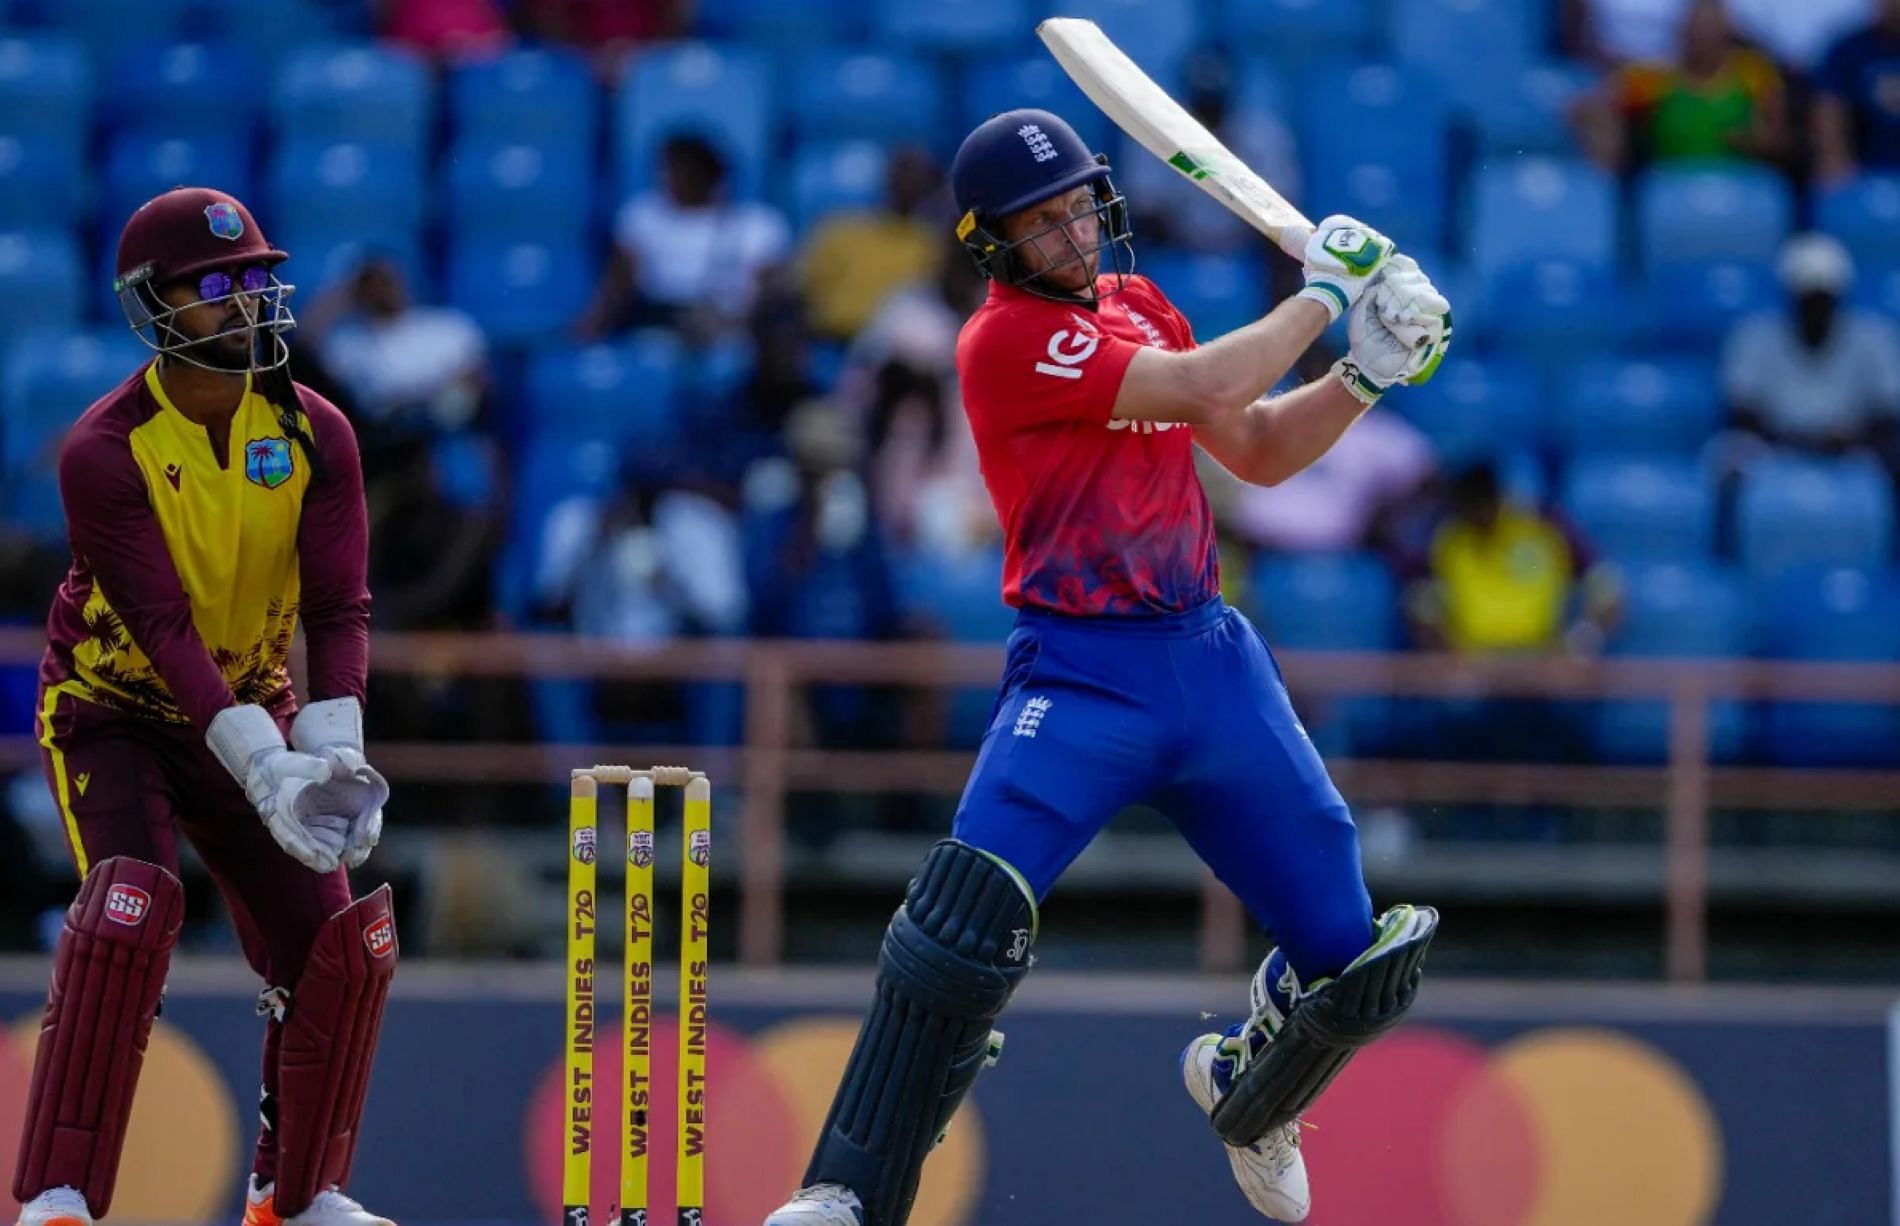 Buttler returned to form with an impressive half-century.